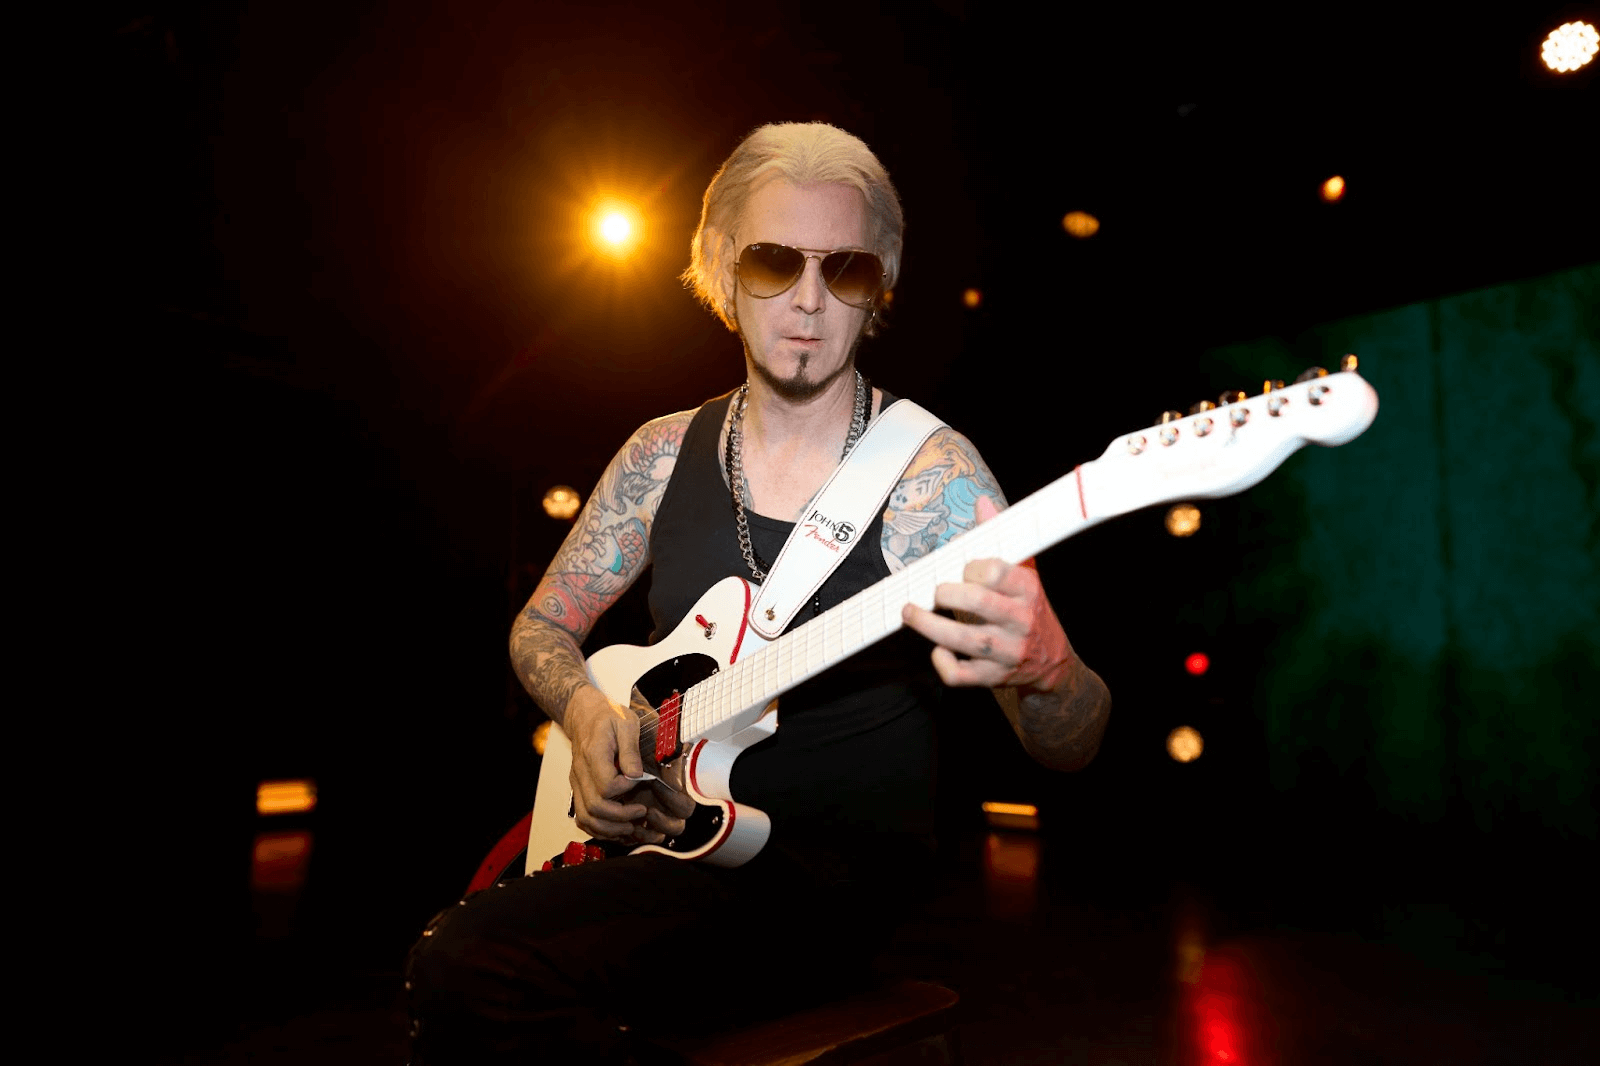 Fender Captures John 5’s Bold and Inventive Style With Limited Edition Signature Telecaster and Accessories Collection